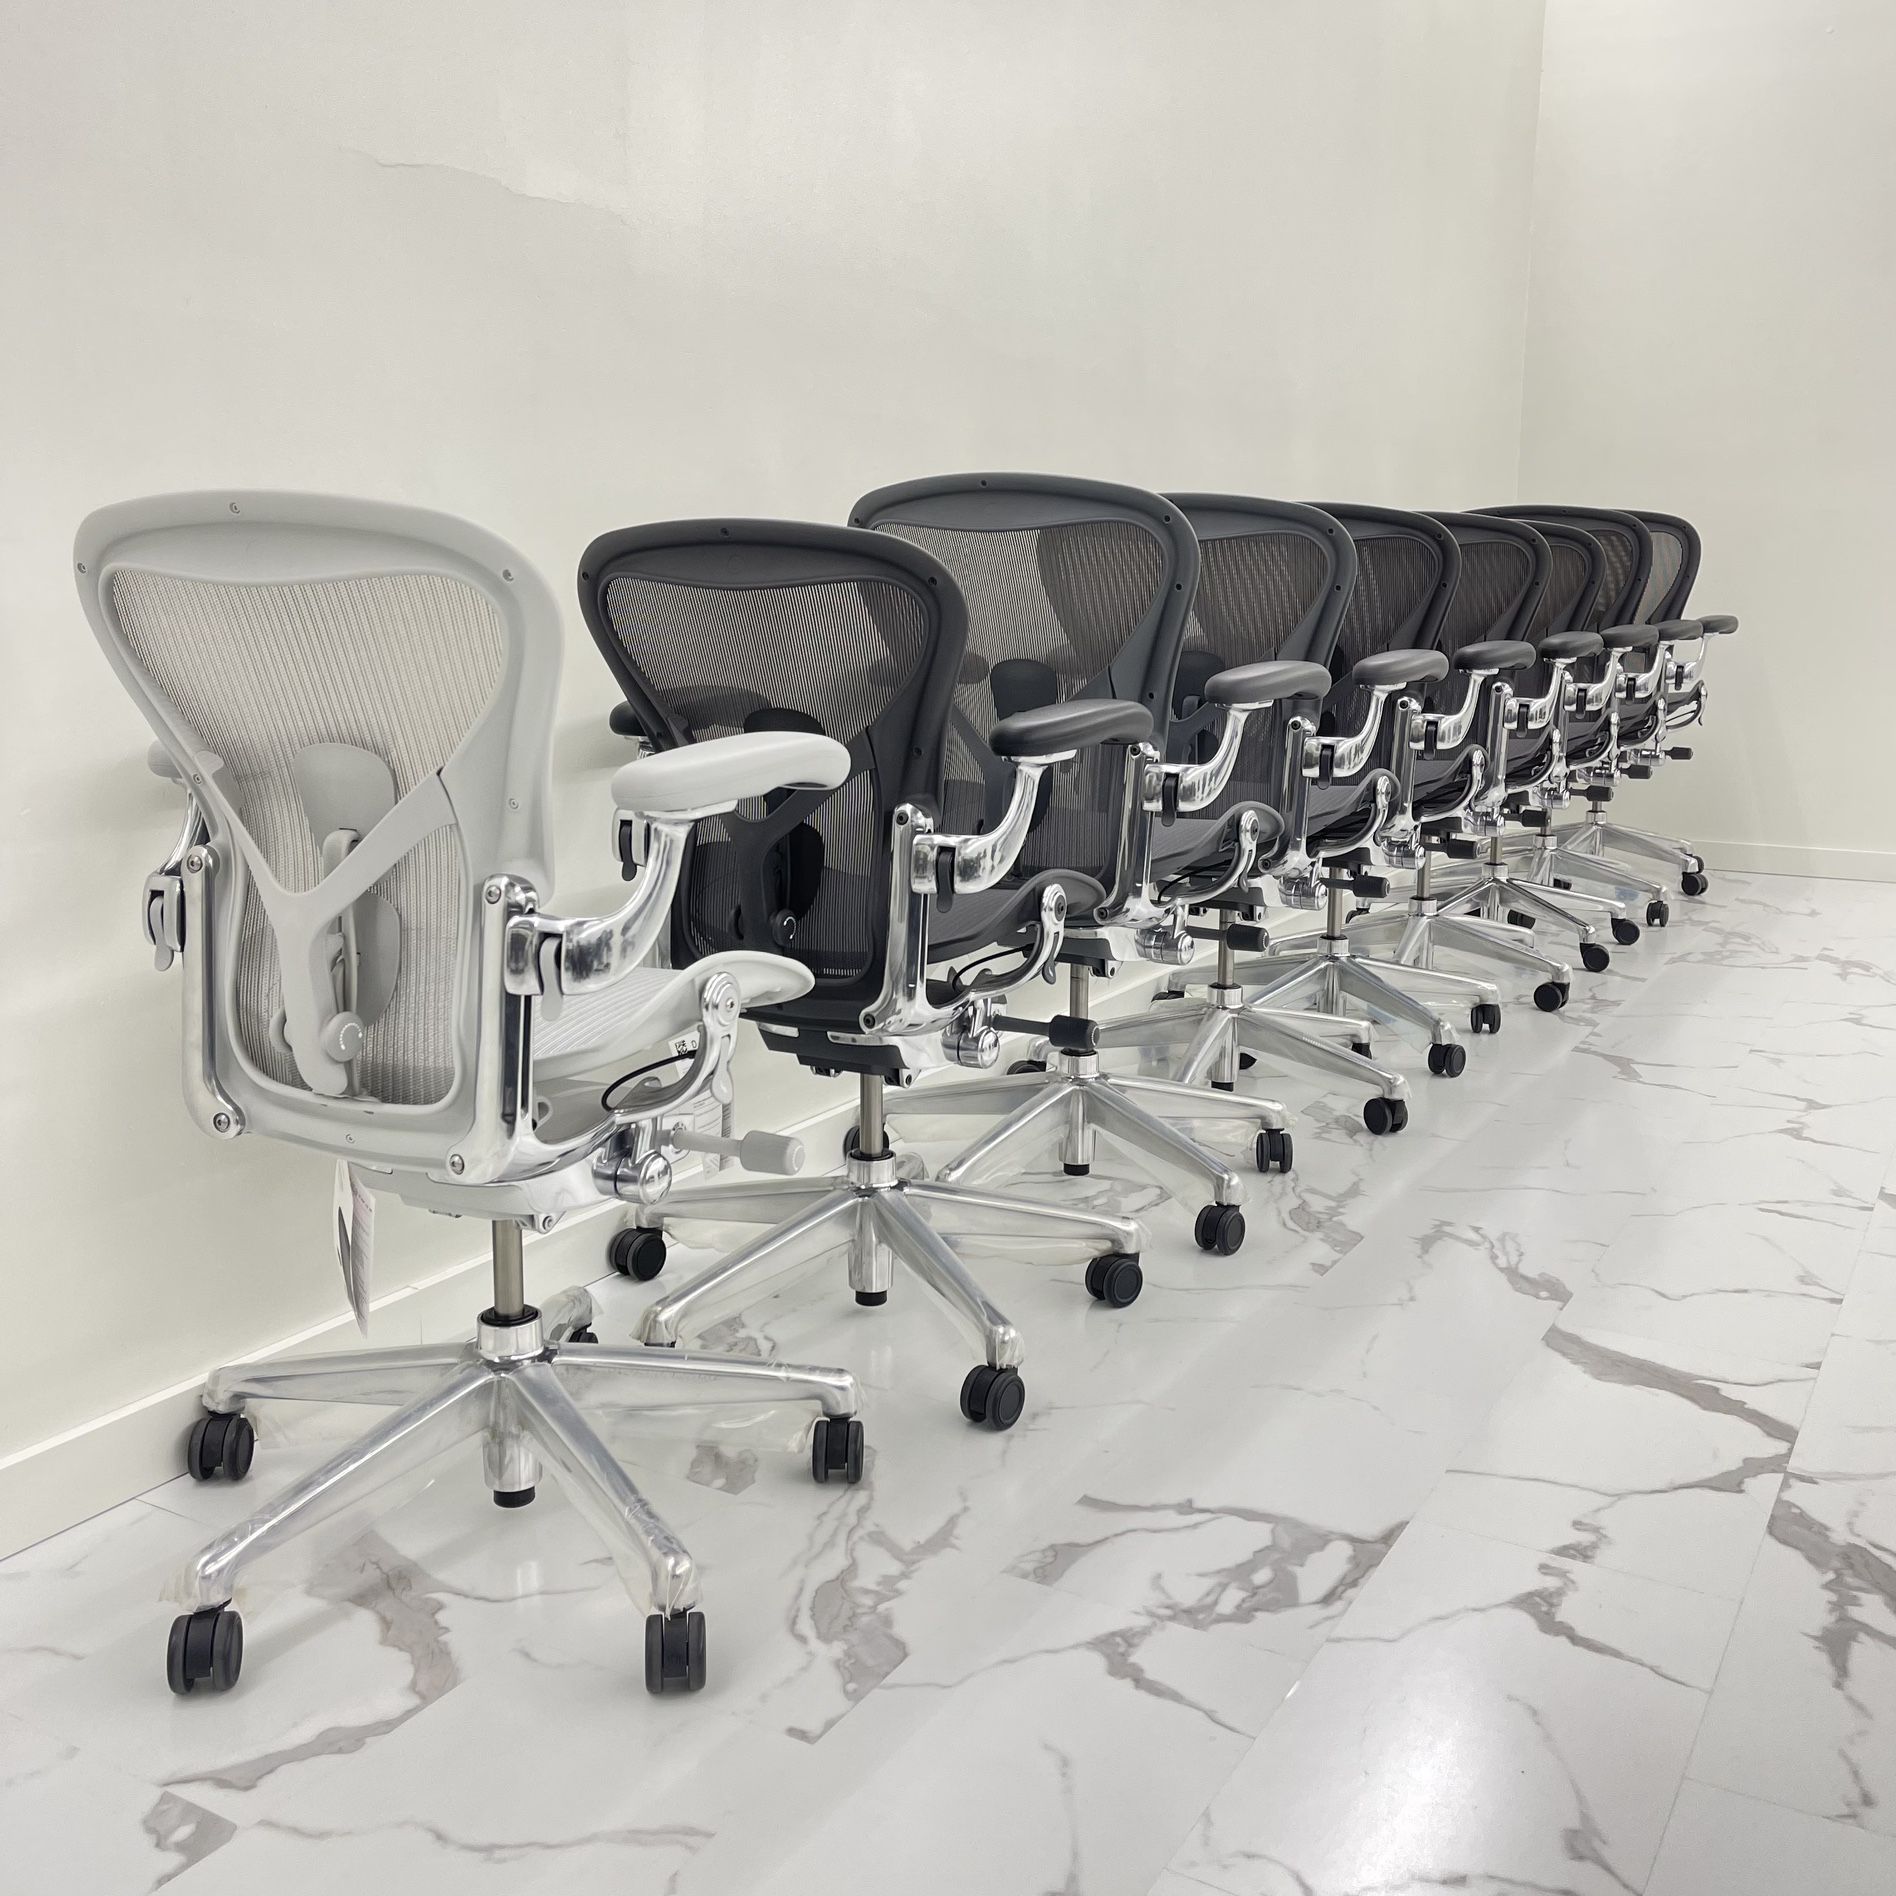 BRAND NEW HERMAN MILLER REMASTERED AERON CHAIRS SIZES A,B & C! FULLY LOADED POLISHED ALUMINUM WITH POSTURE FIT SL!